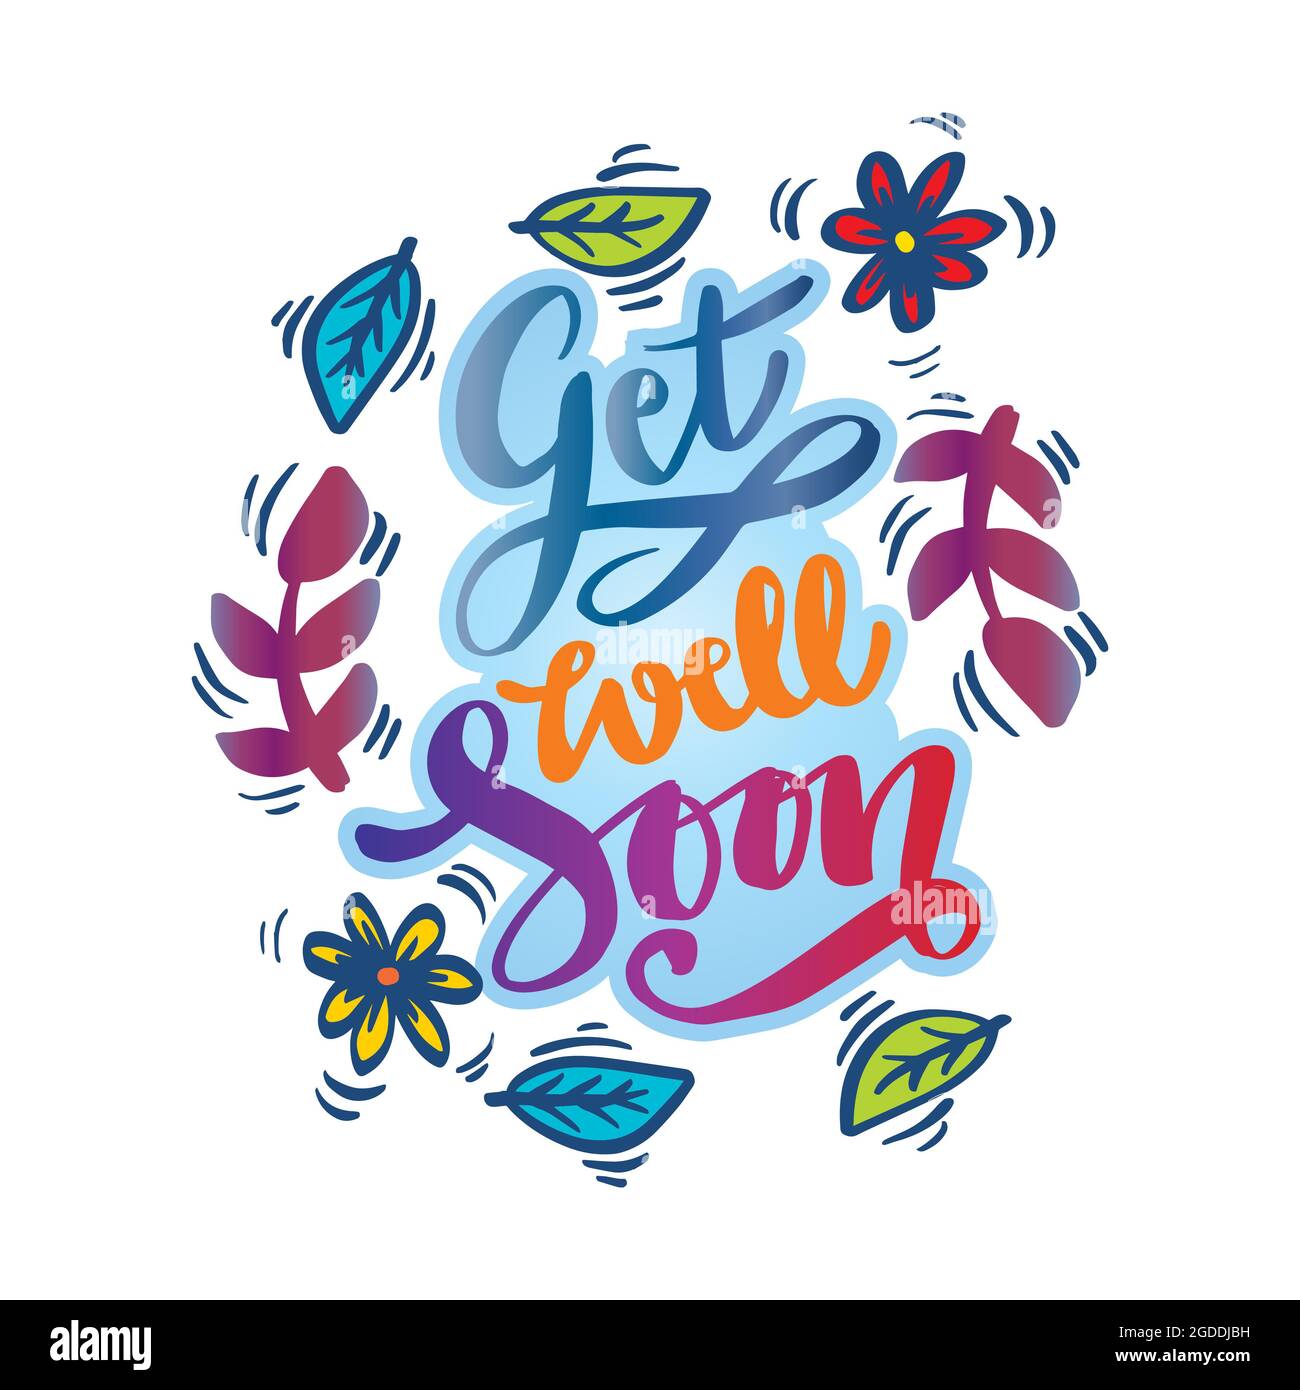 Hand lettering Get well soon card decorated with hand drawn floral. Hand lettering Get well soon card decorated with hand drawn floral. Stock Photo